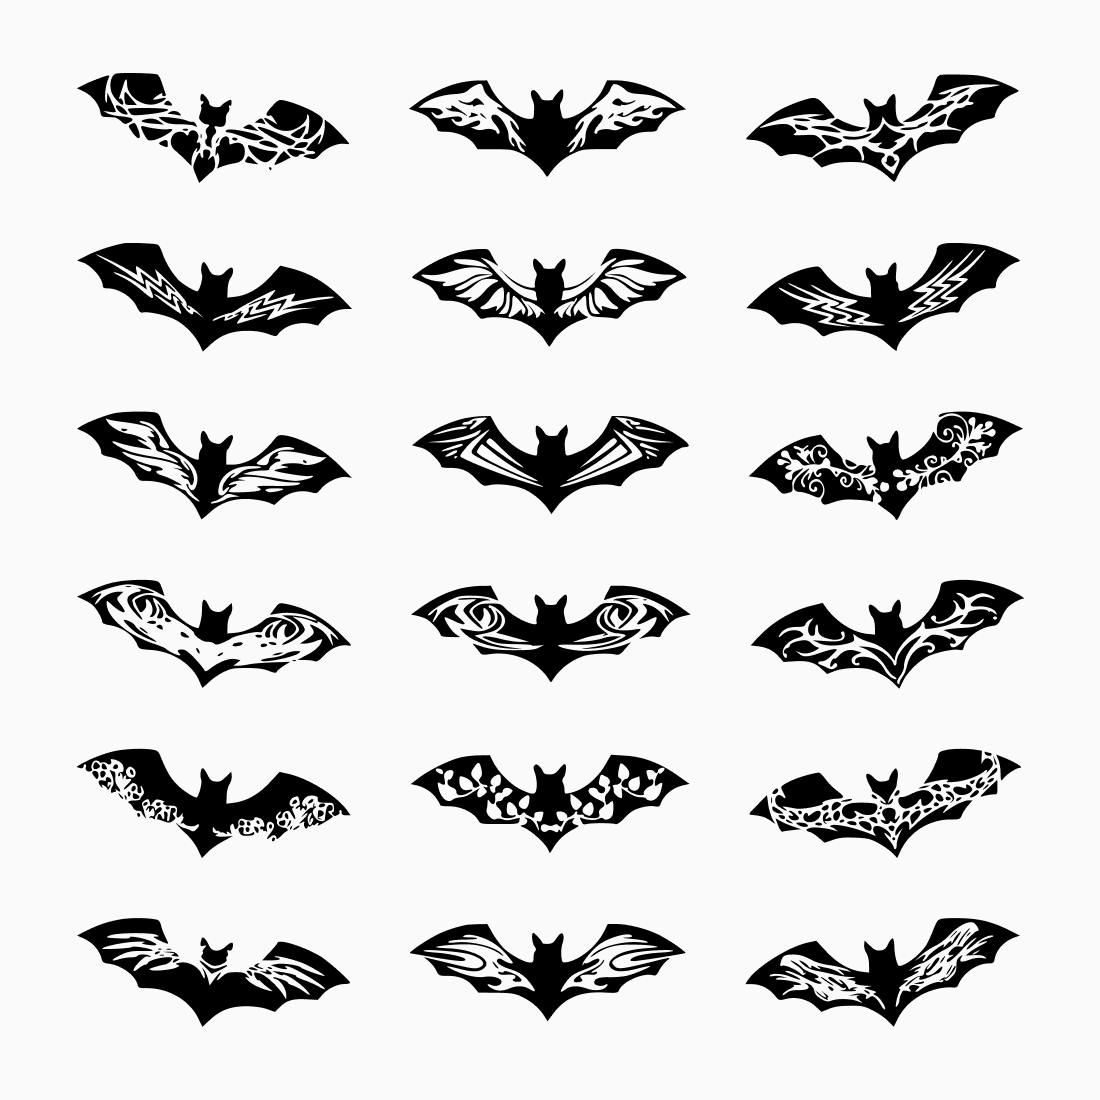 Bunch of bats with different designs on them.